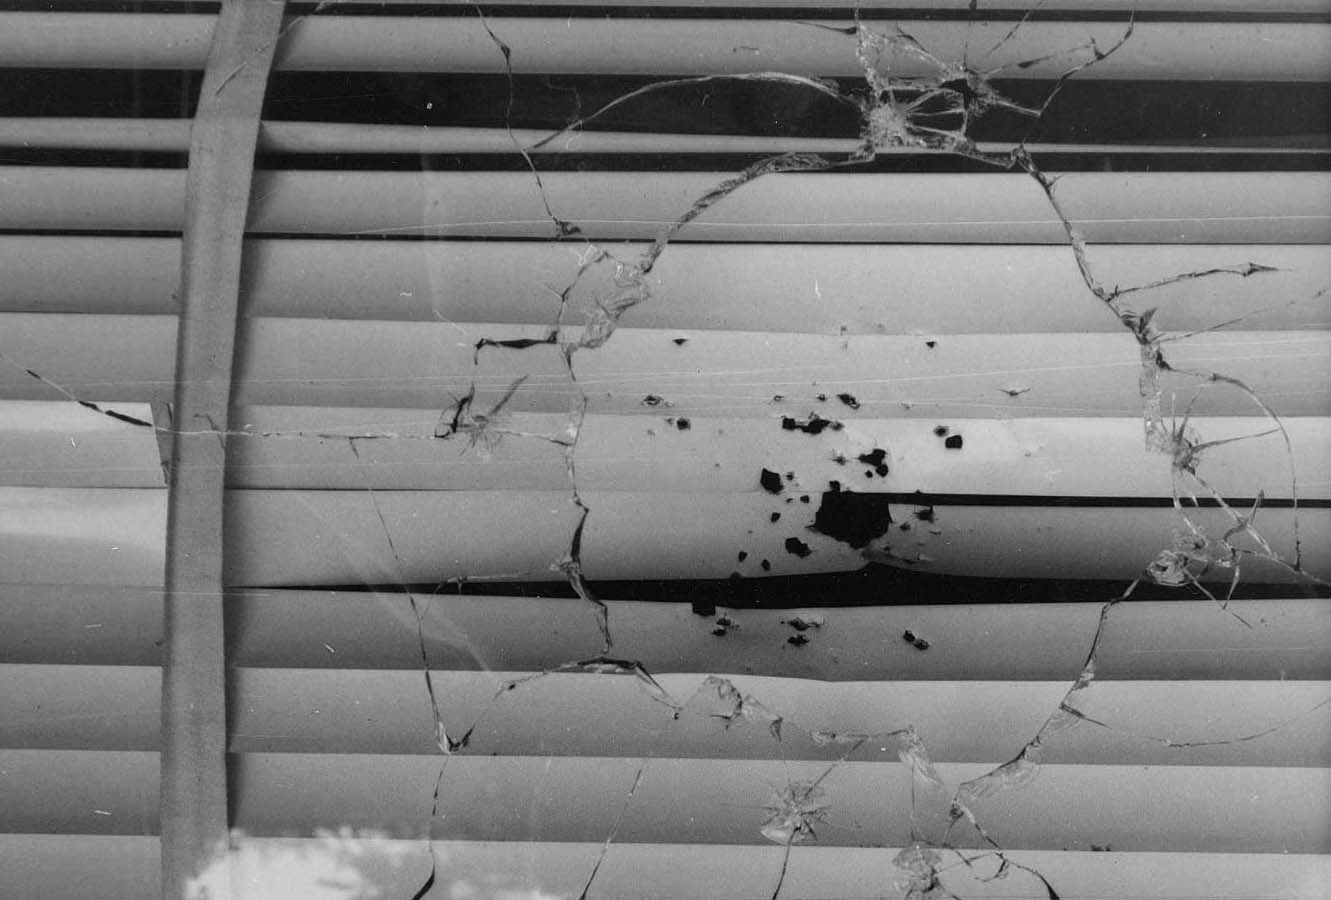 Outside window of SCOPE house after it had been shot, with shattered glass and bullet holes.